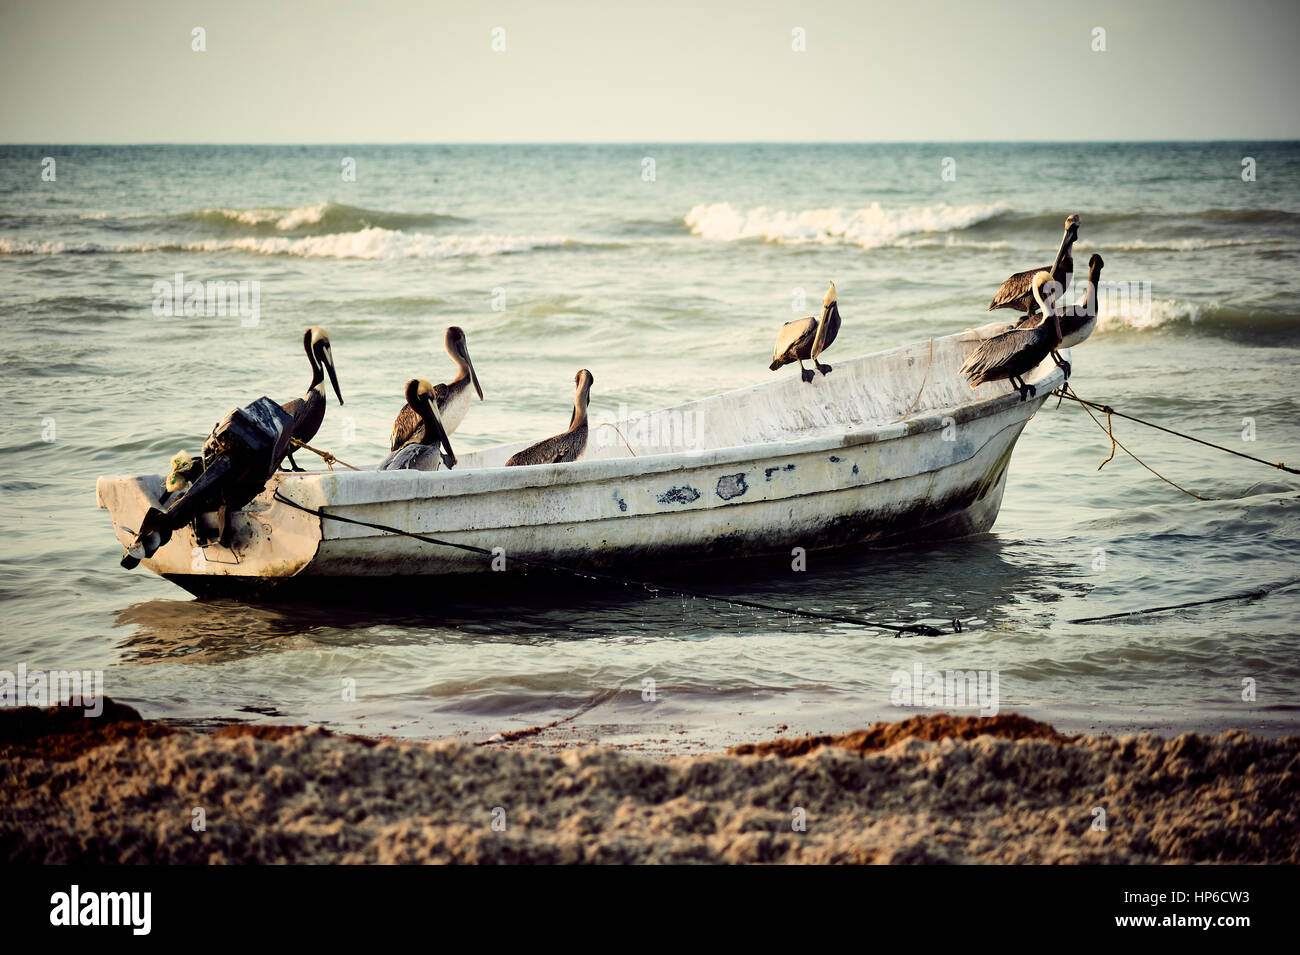 A group of pelicans on a small fishing boat, at sunset in Progreso, Yucatan, Mexico. Stock Photo